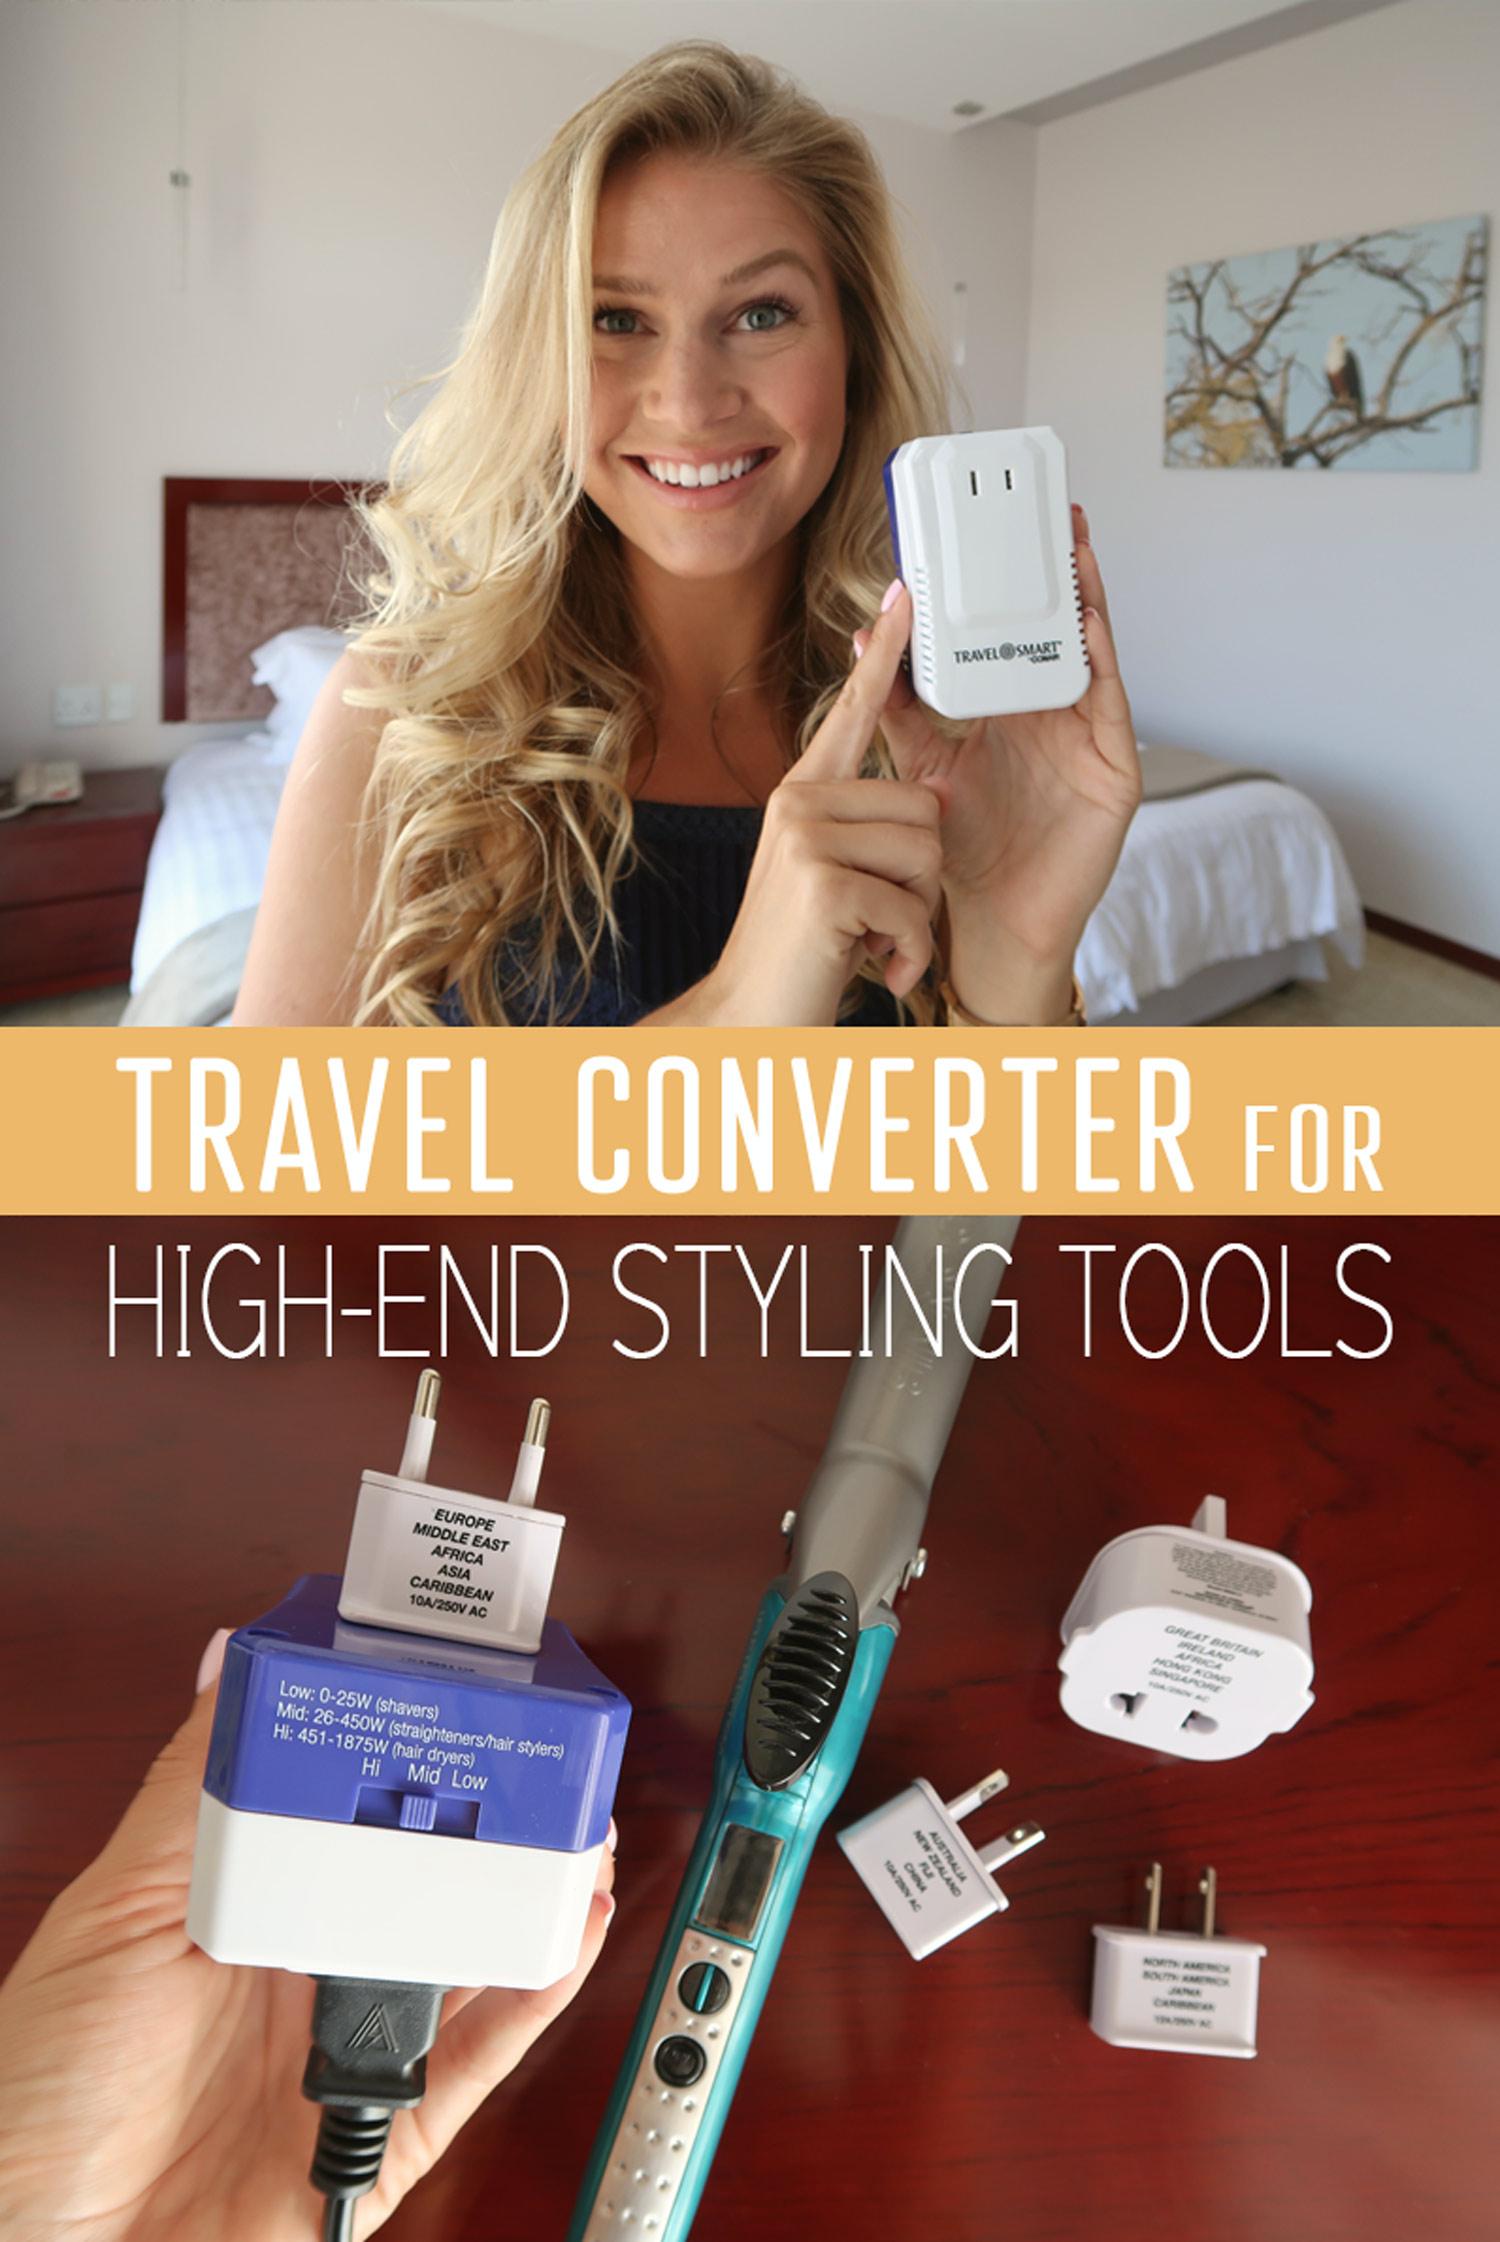 Travel Converter for High-End Styling Tools